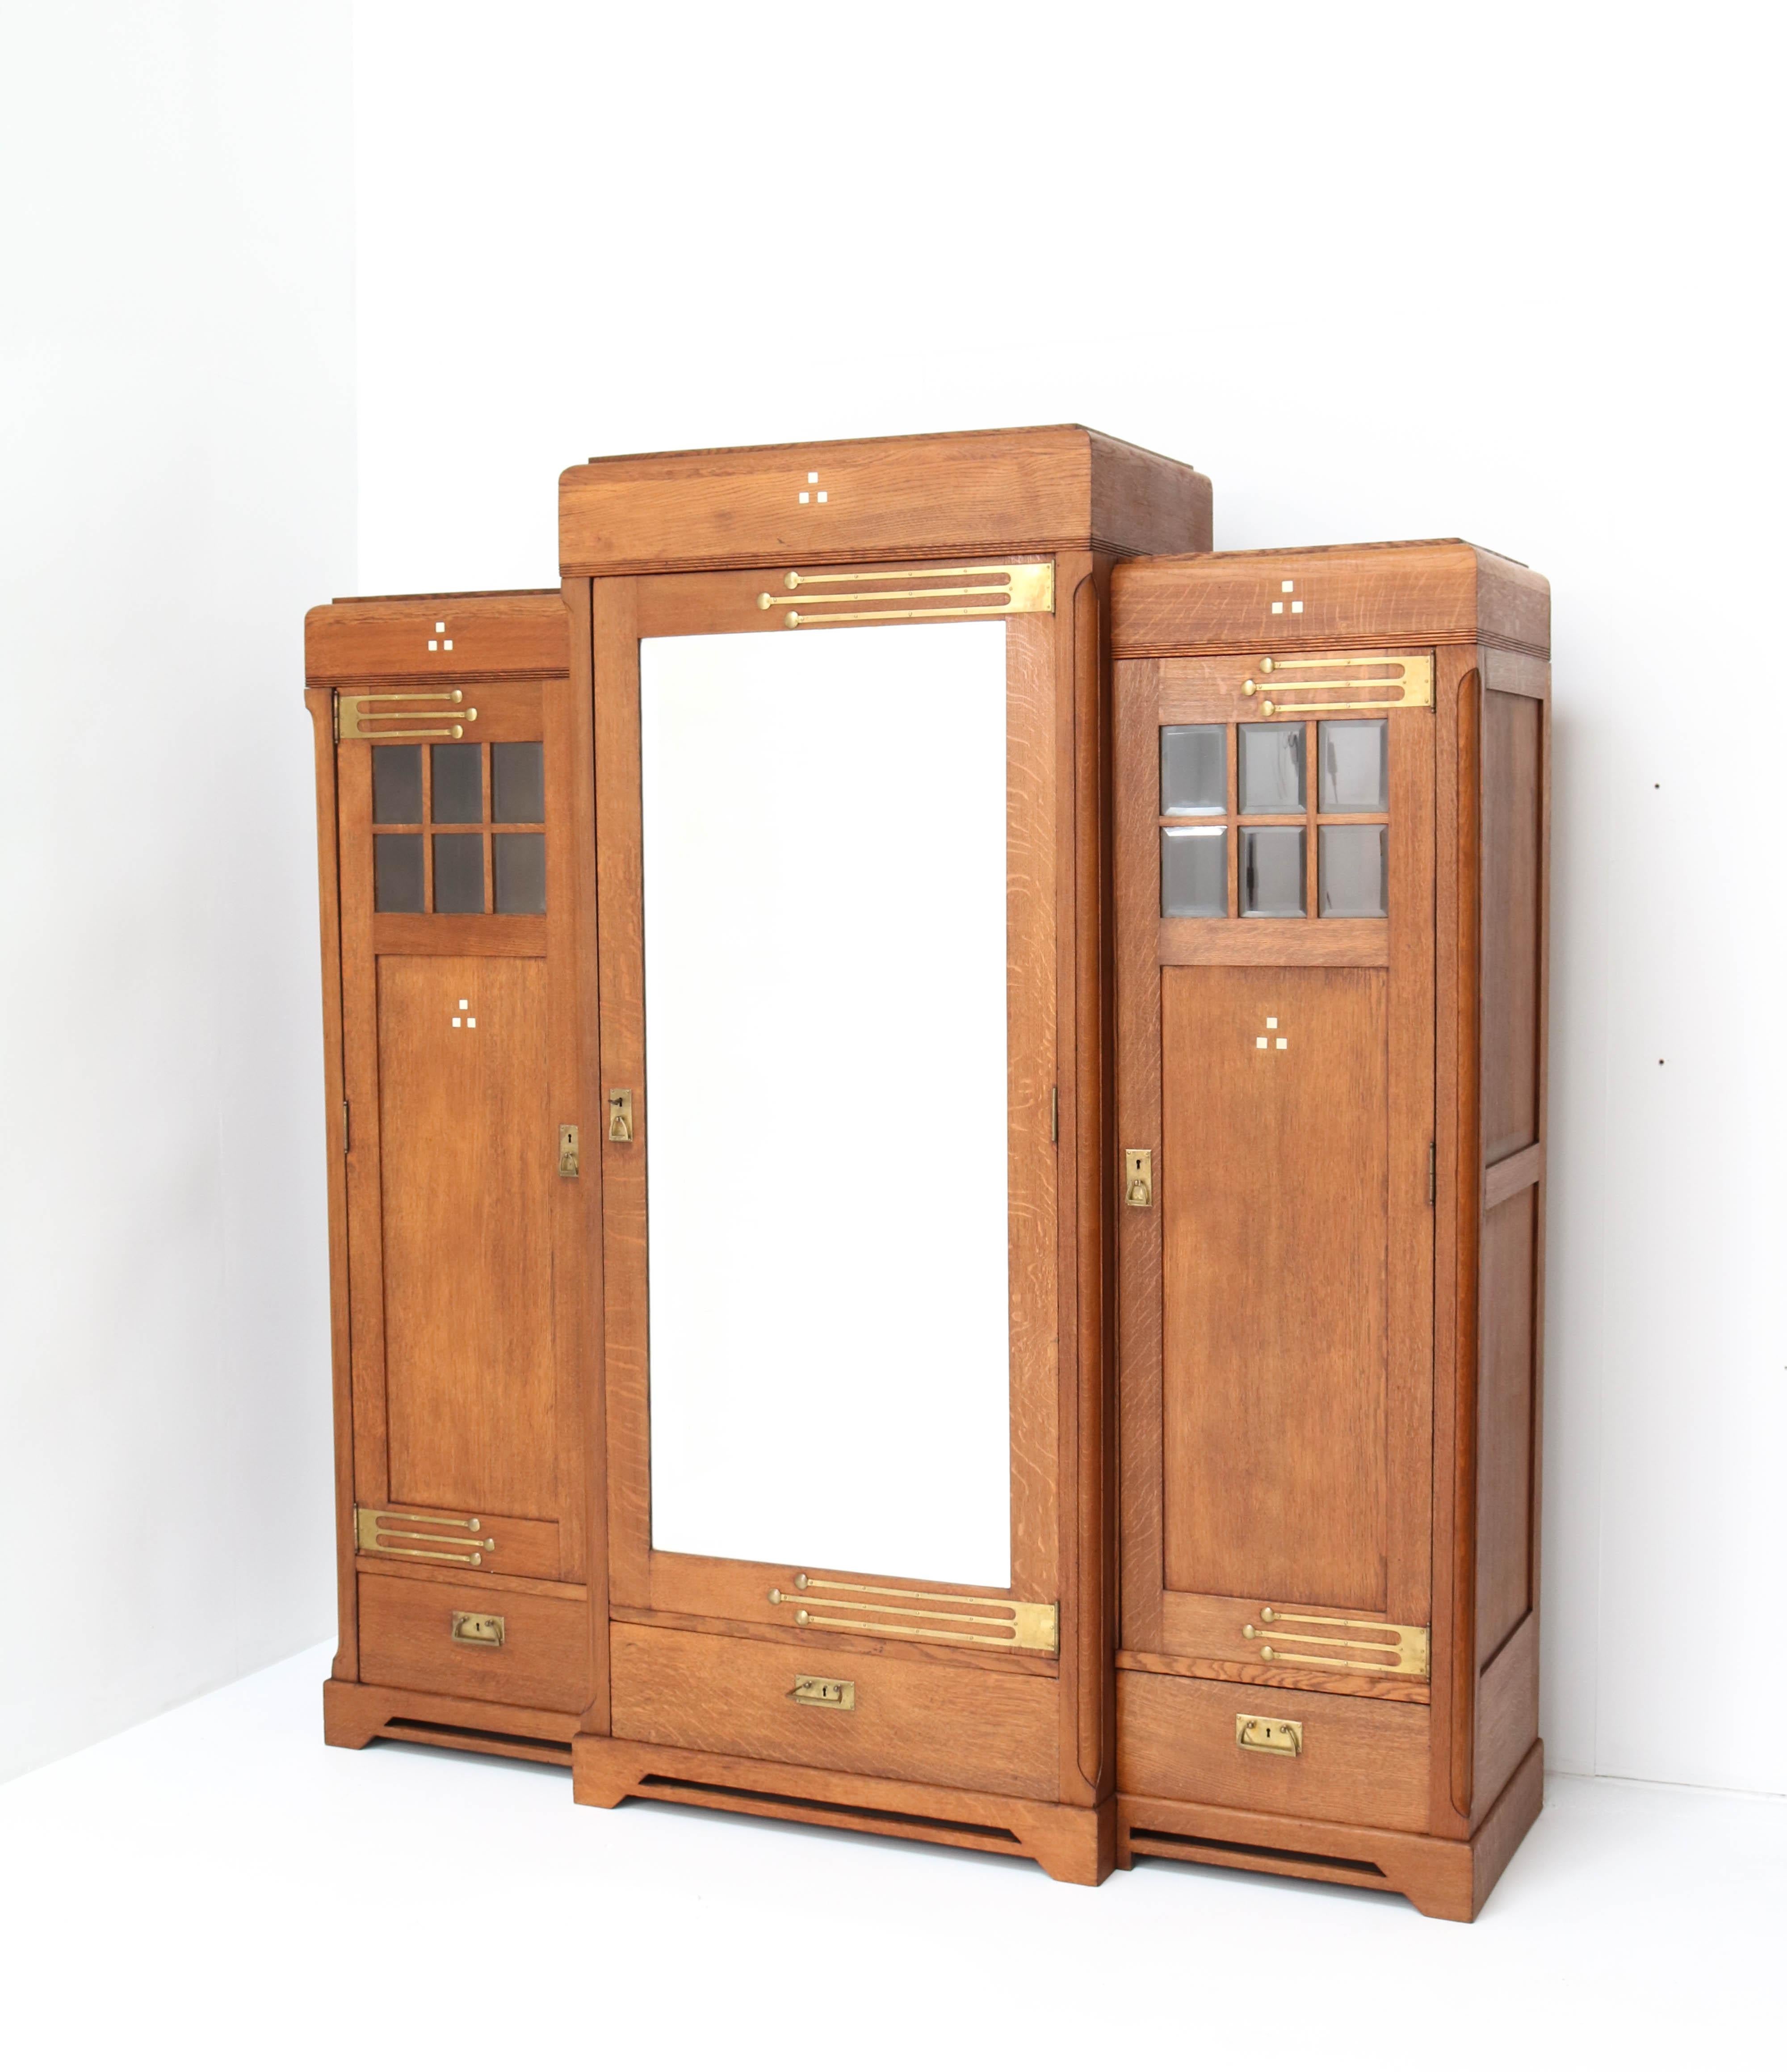 Magnificent and rare Art Nouveau Arts & Crafts armoire or wardrobe.
Striking Dutch design from the 1900s.
Solid oak with original solid brass hinges and handles.
All three doors have the original beveled glass and beveled glass mirror.
This